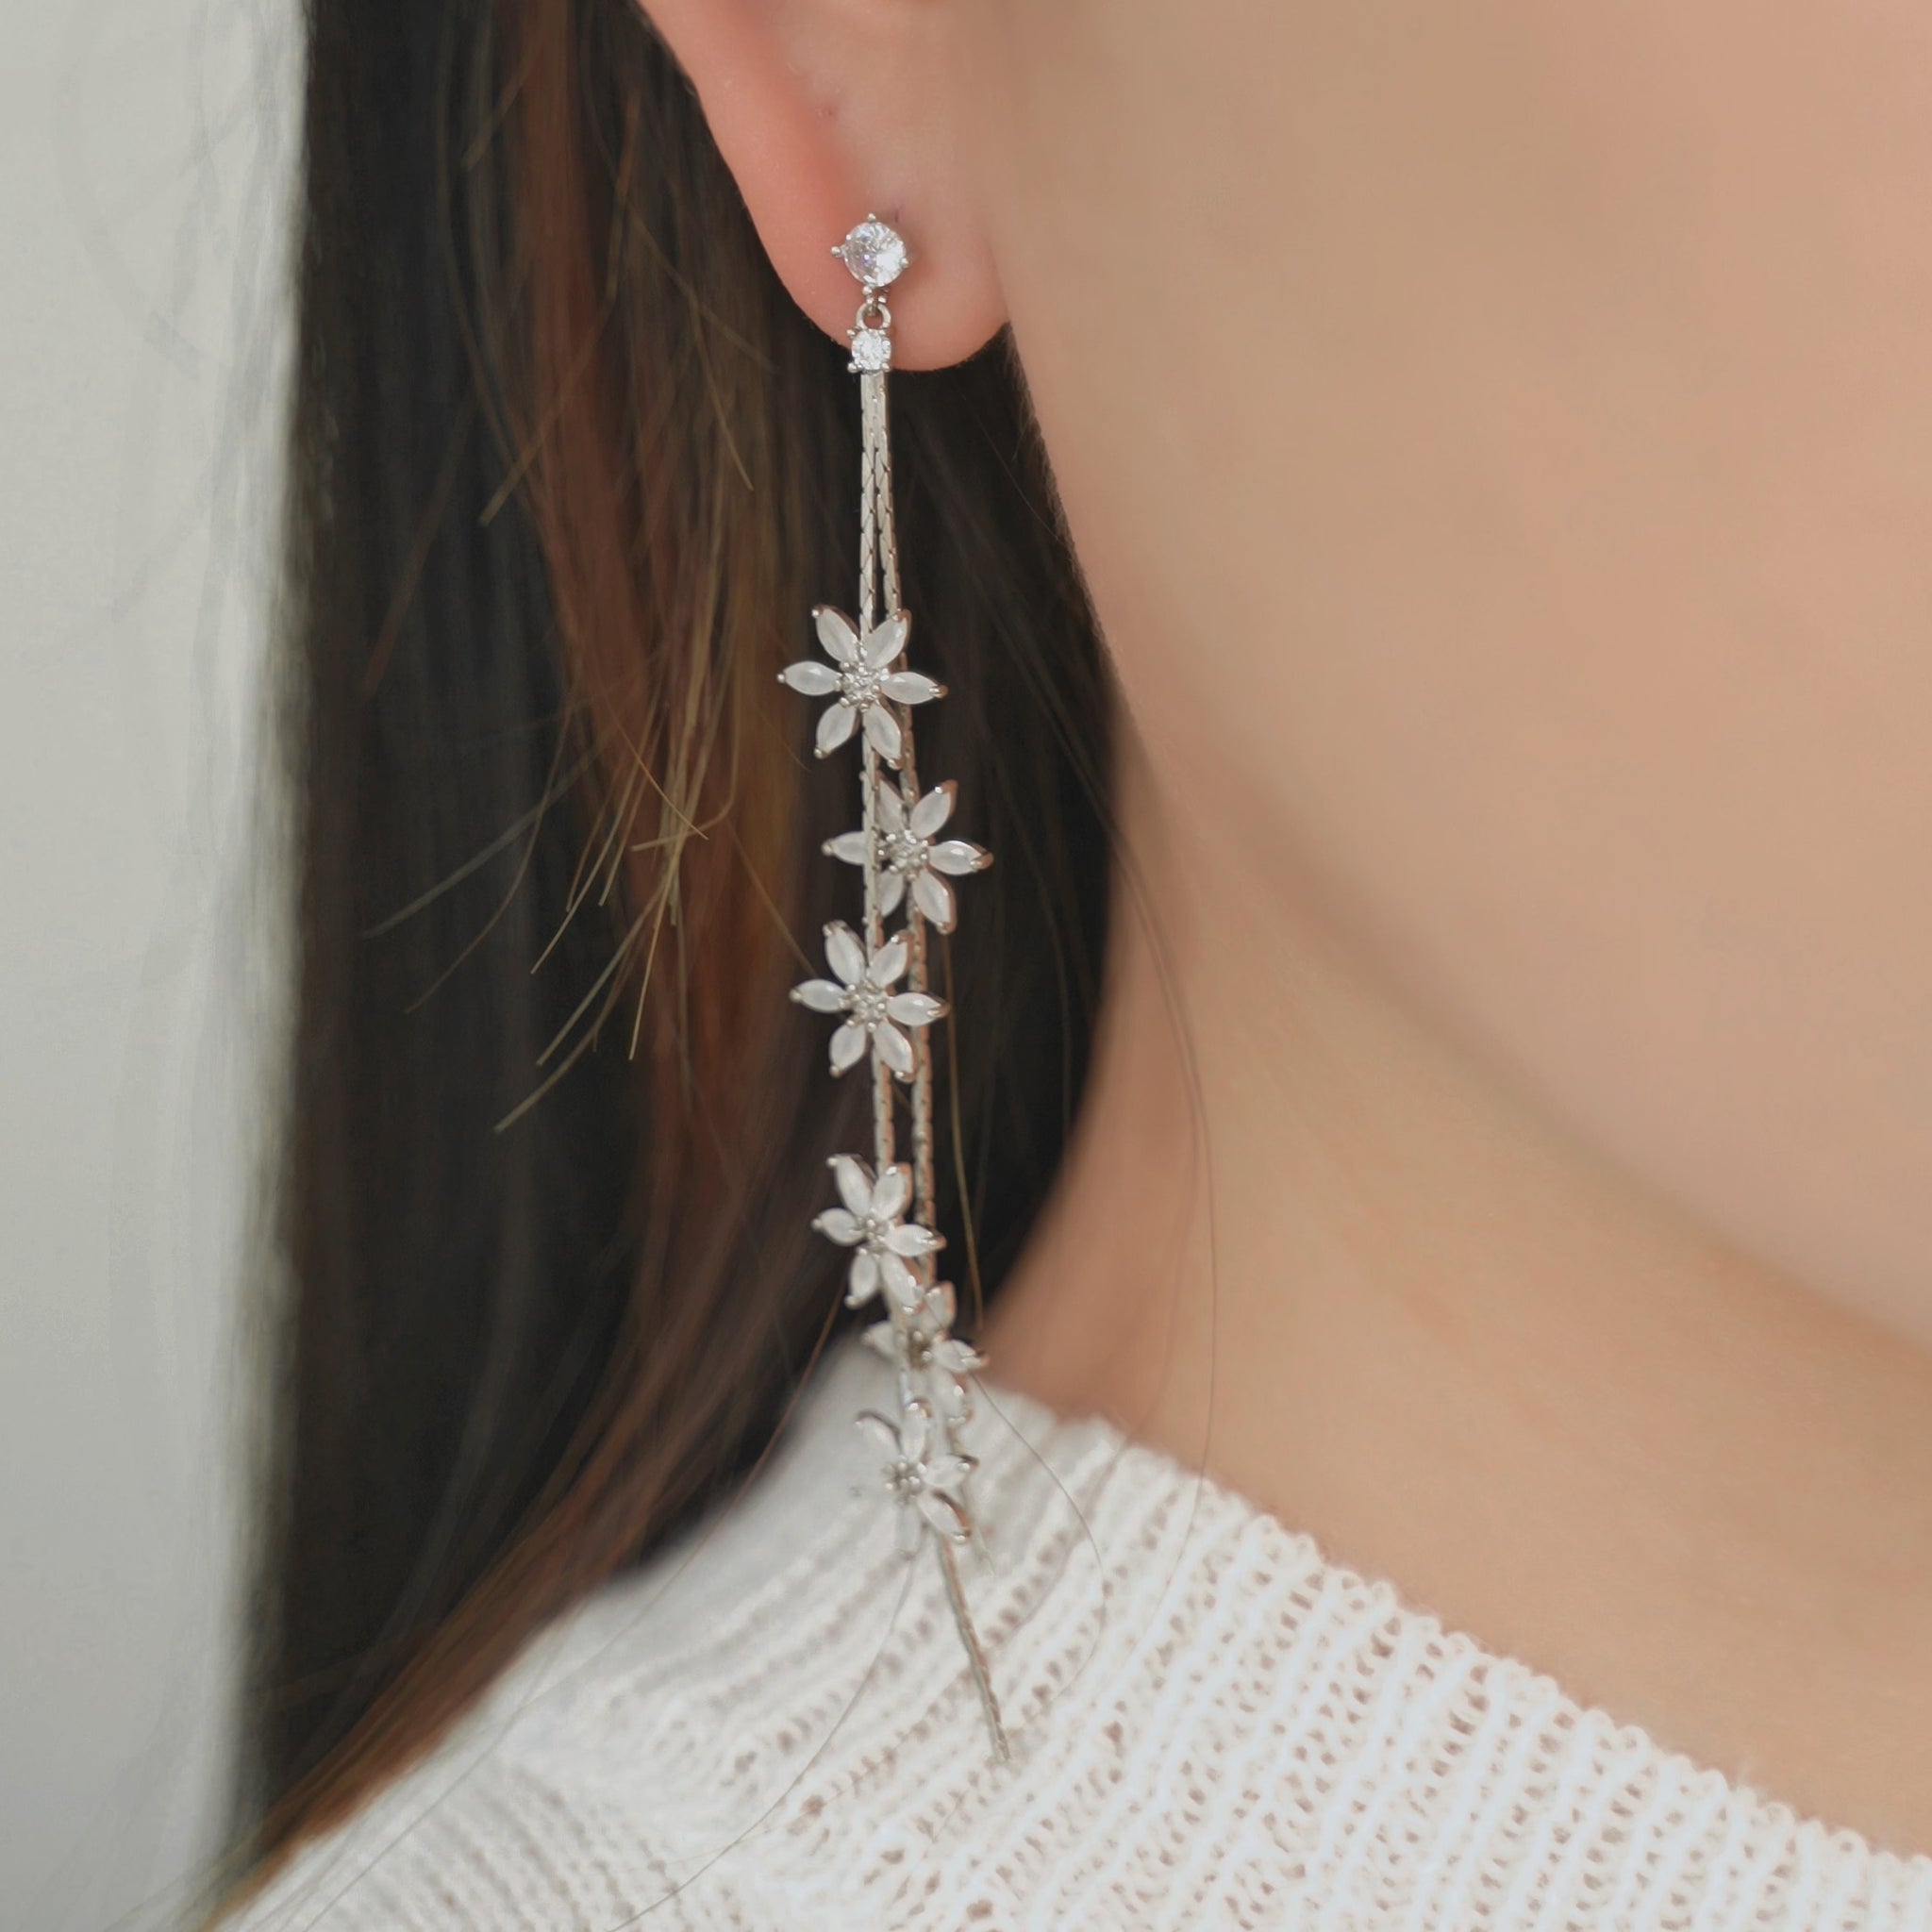 A long drop earrings with multiple small, sparkling floral earrings design trailing down.